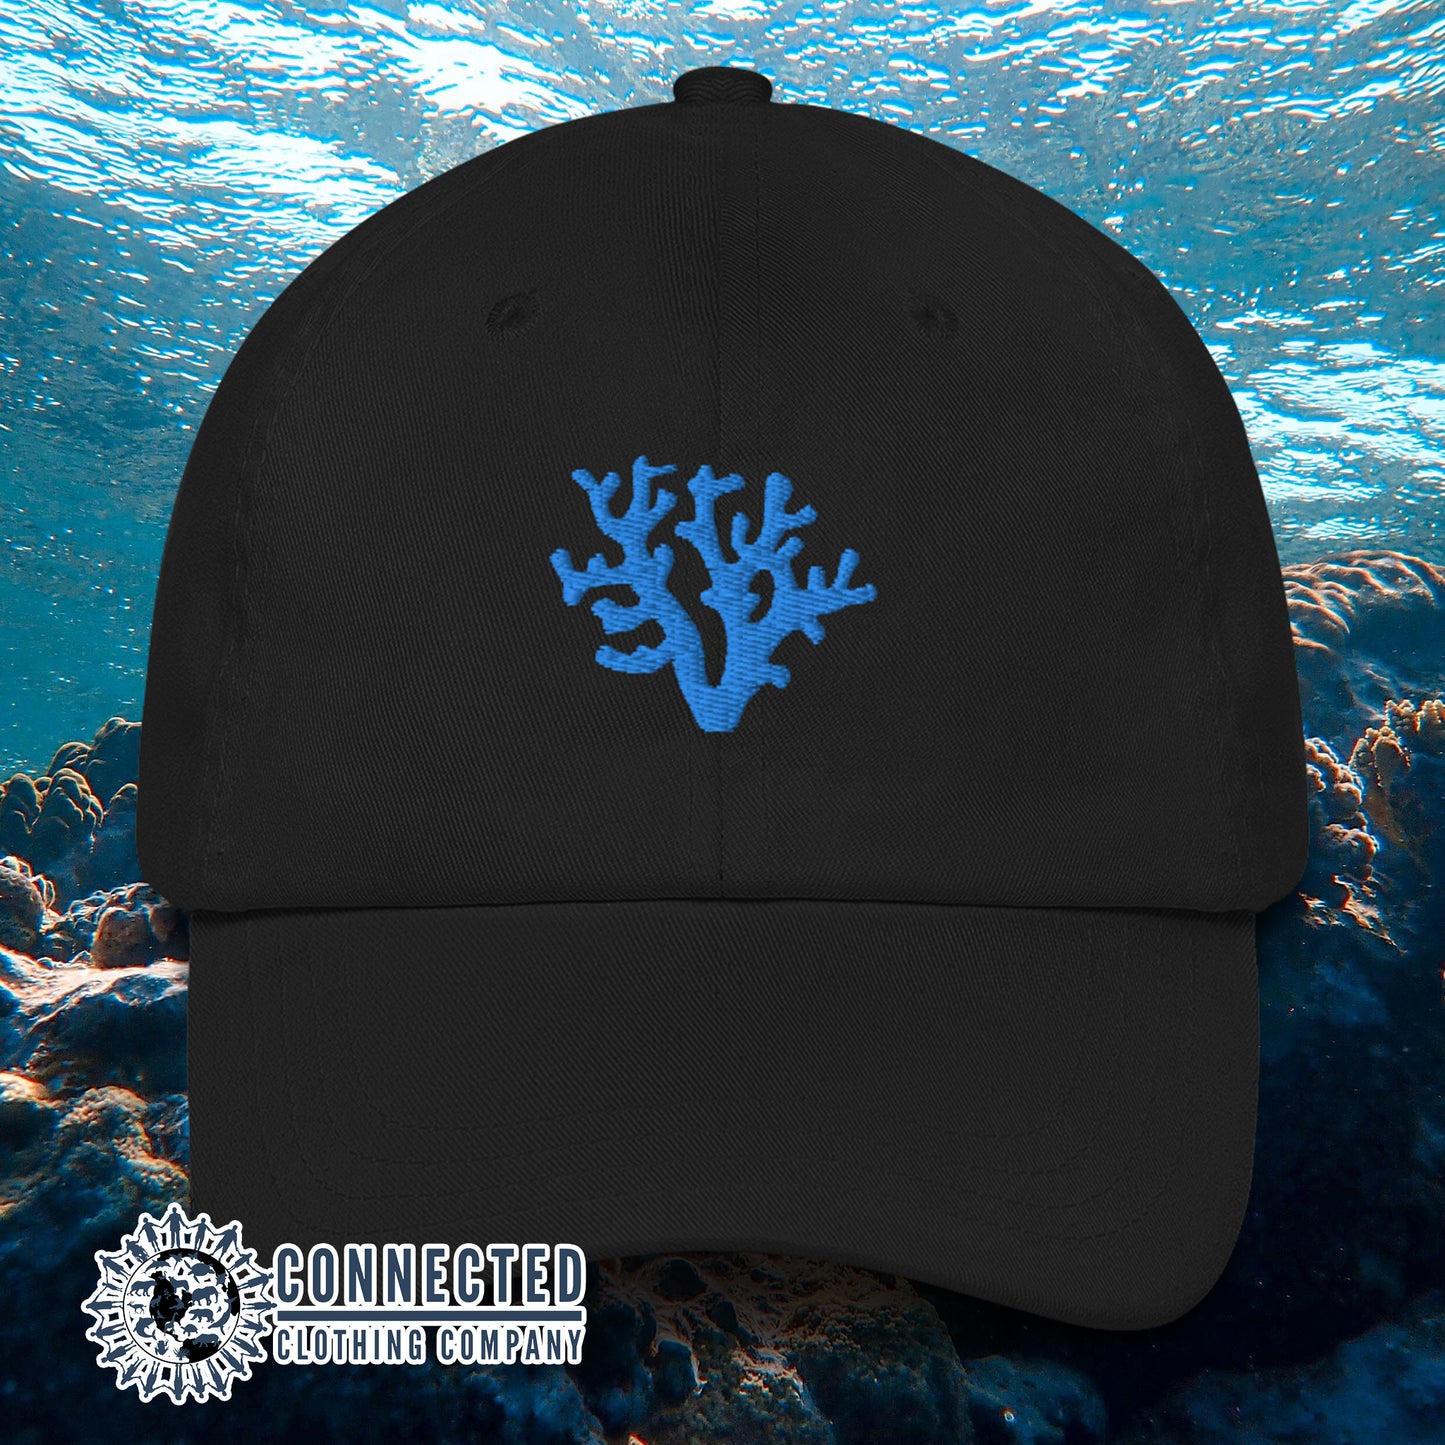 Black Coral Cotton Cap - sweetsherriloudesigns - Ethically and Sustainably Made - 10% donated to Mission Blue ocean conservation